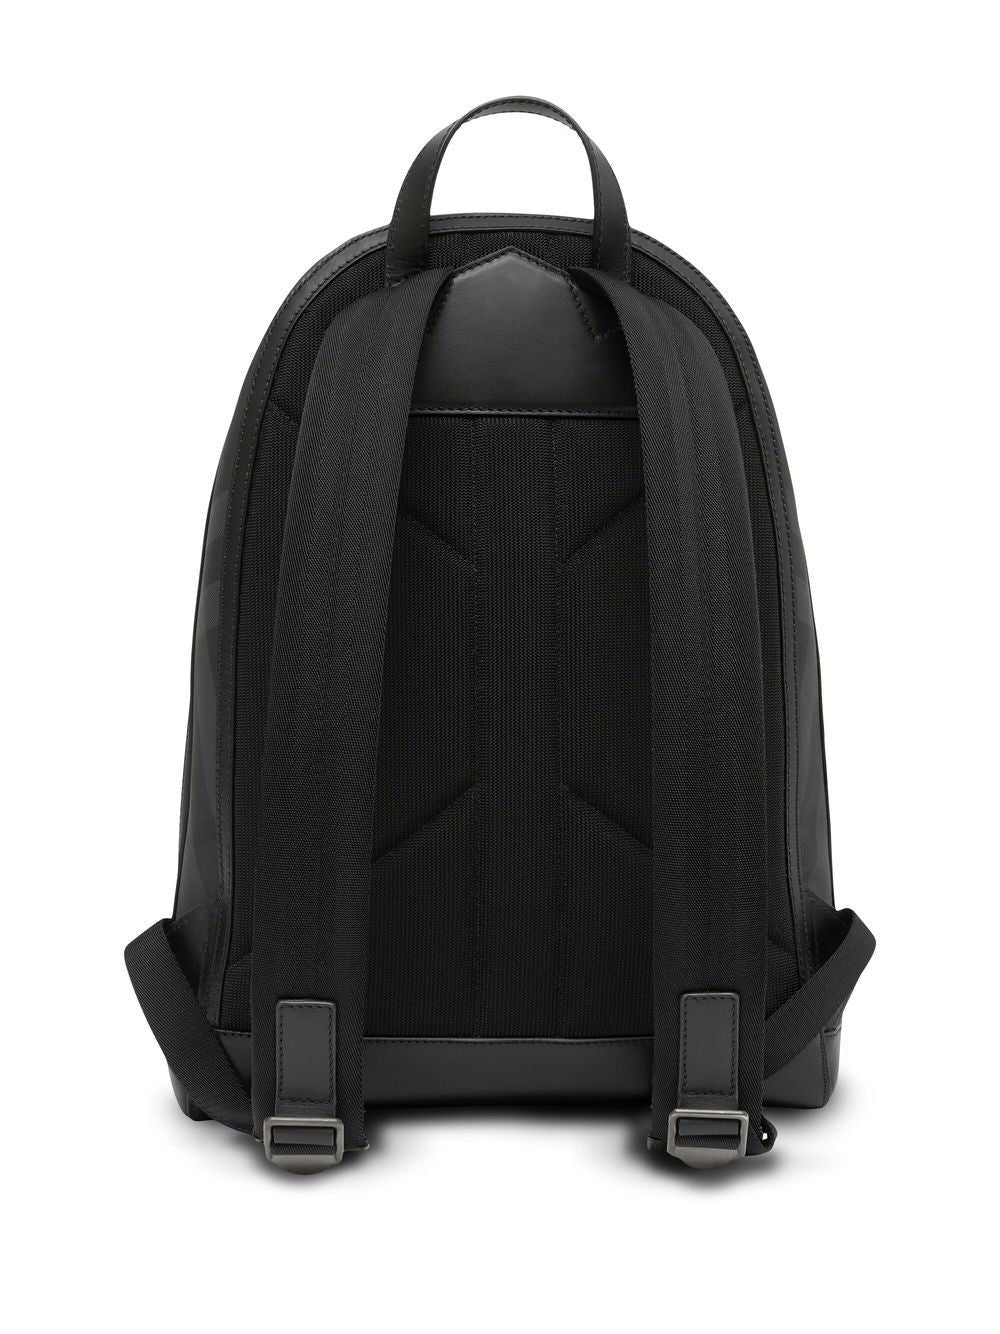 BURBERRY Charcoal Grey Nylon Backpack for Men